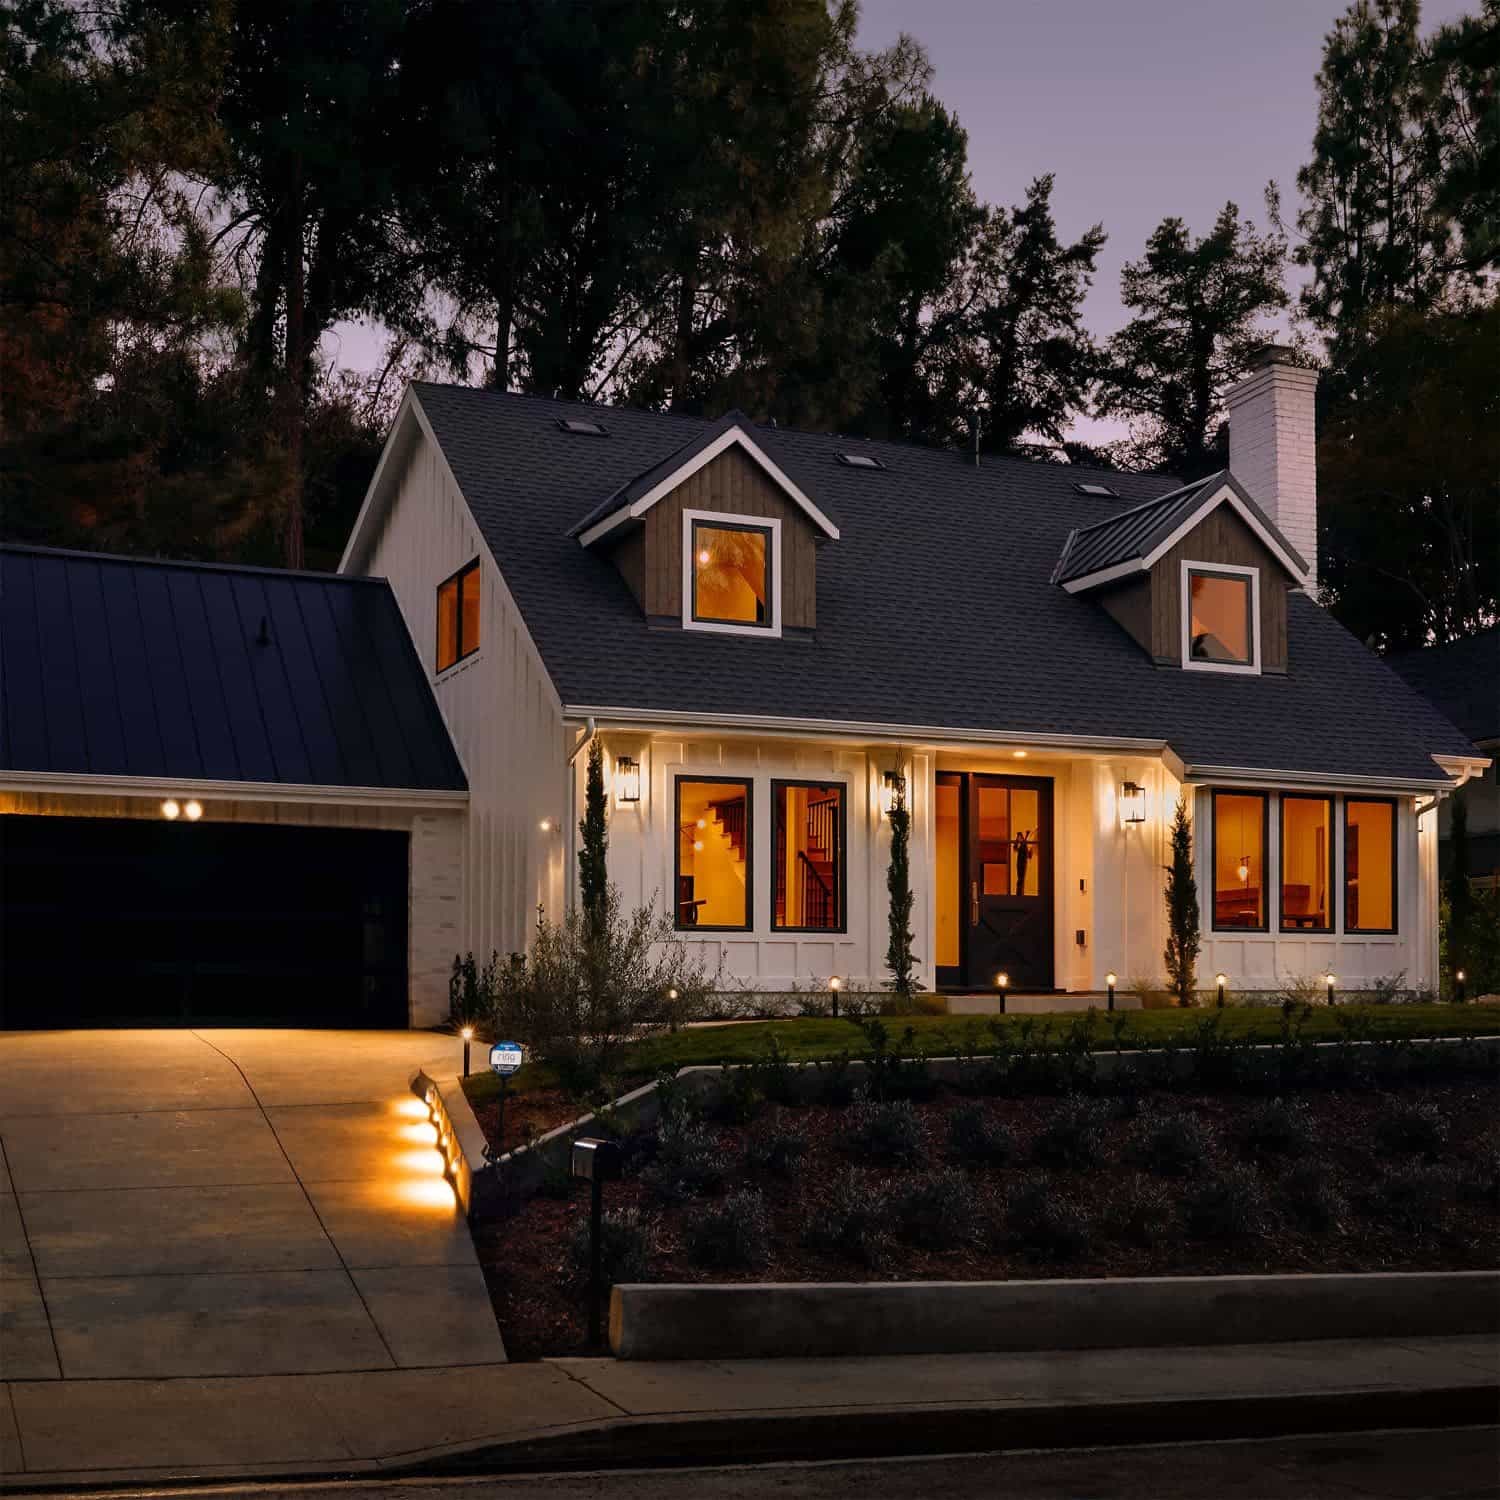 Smart Lighting Pathlight Battery - Outside at dusk, a home is illuminated with an assortment of lights, including several Pathlight Battery lights.